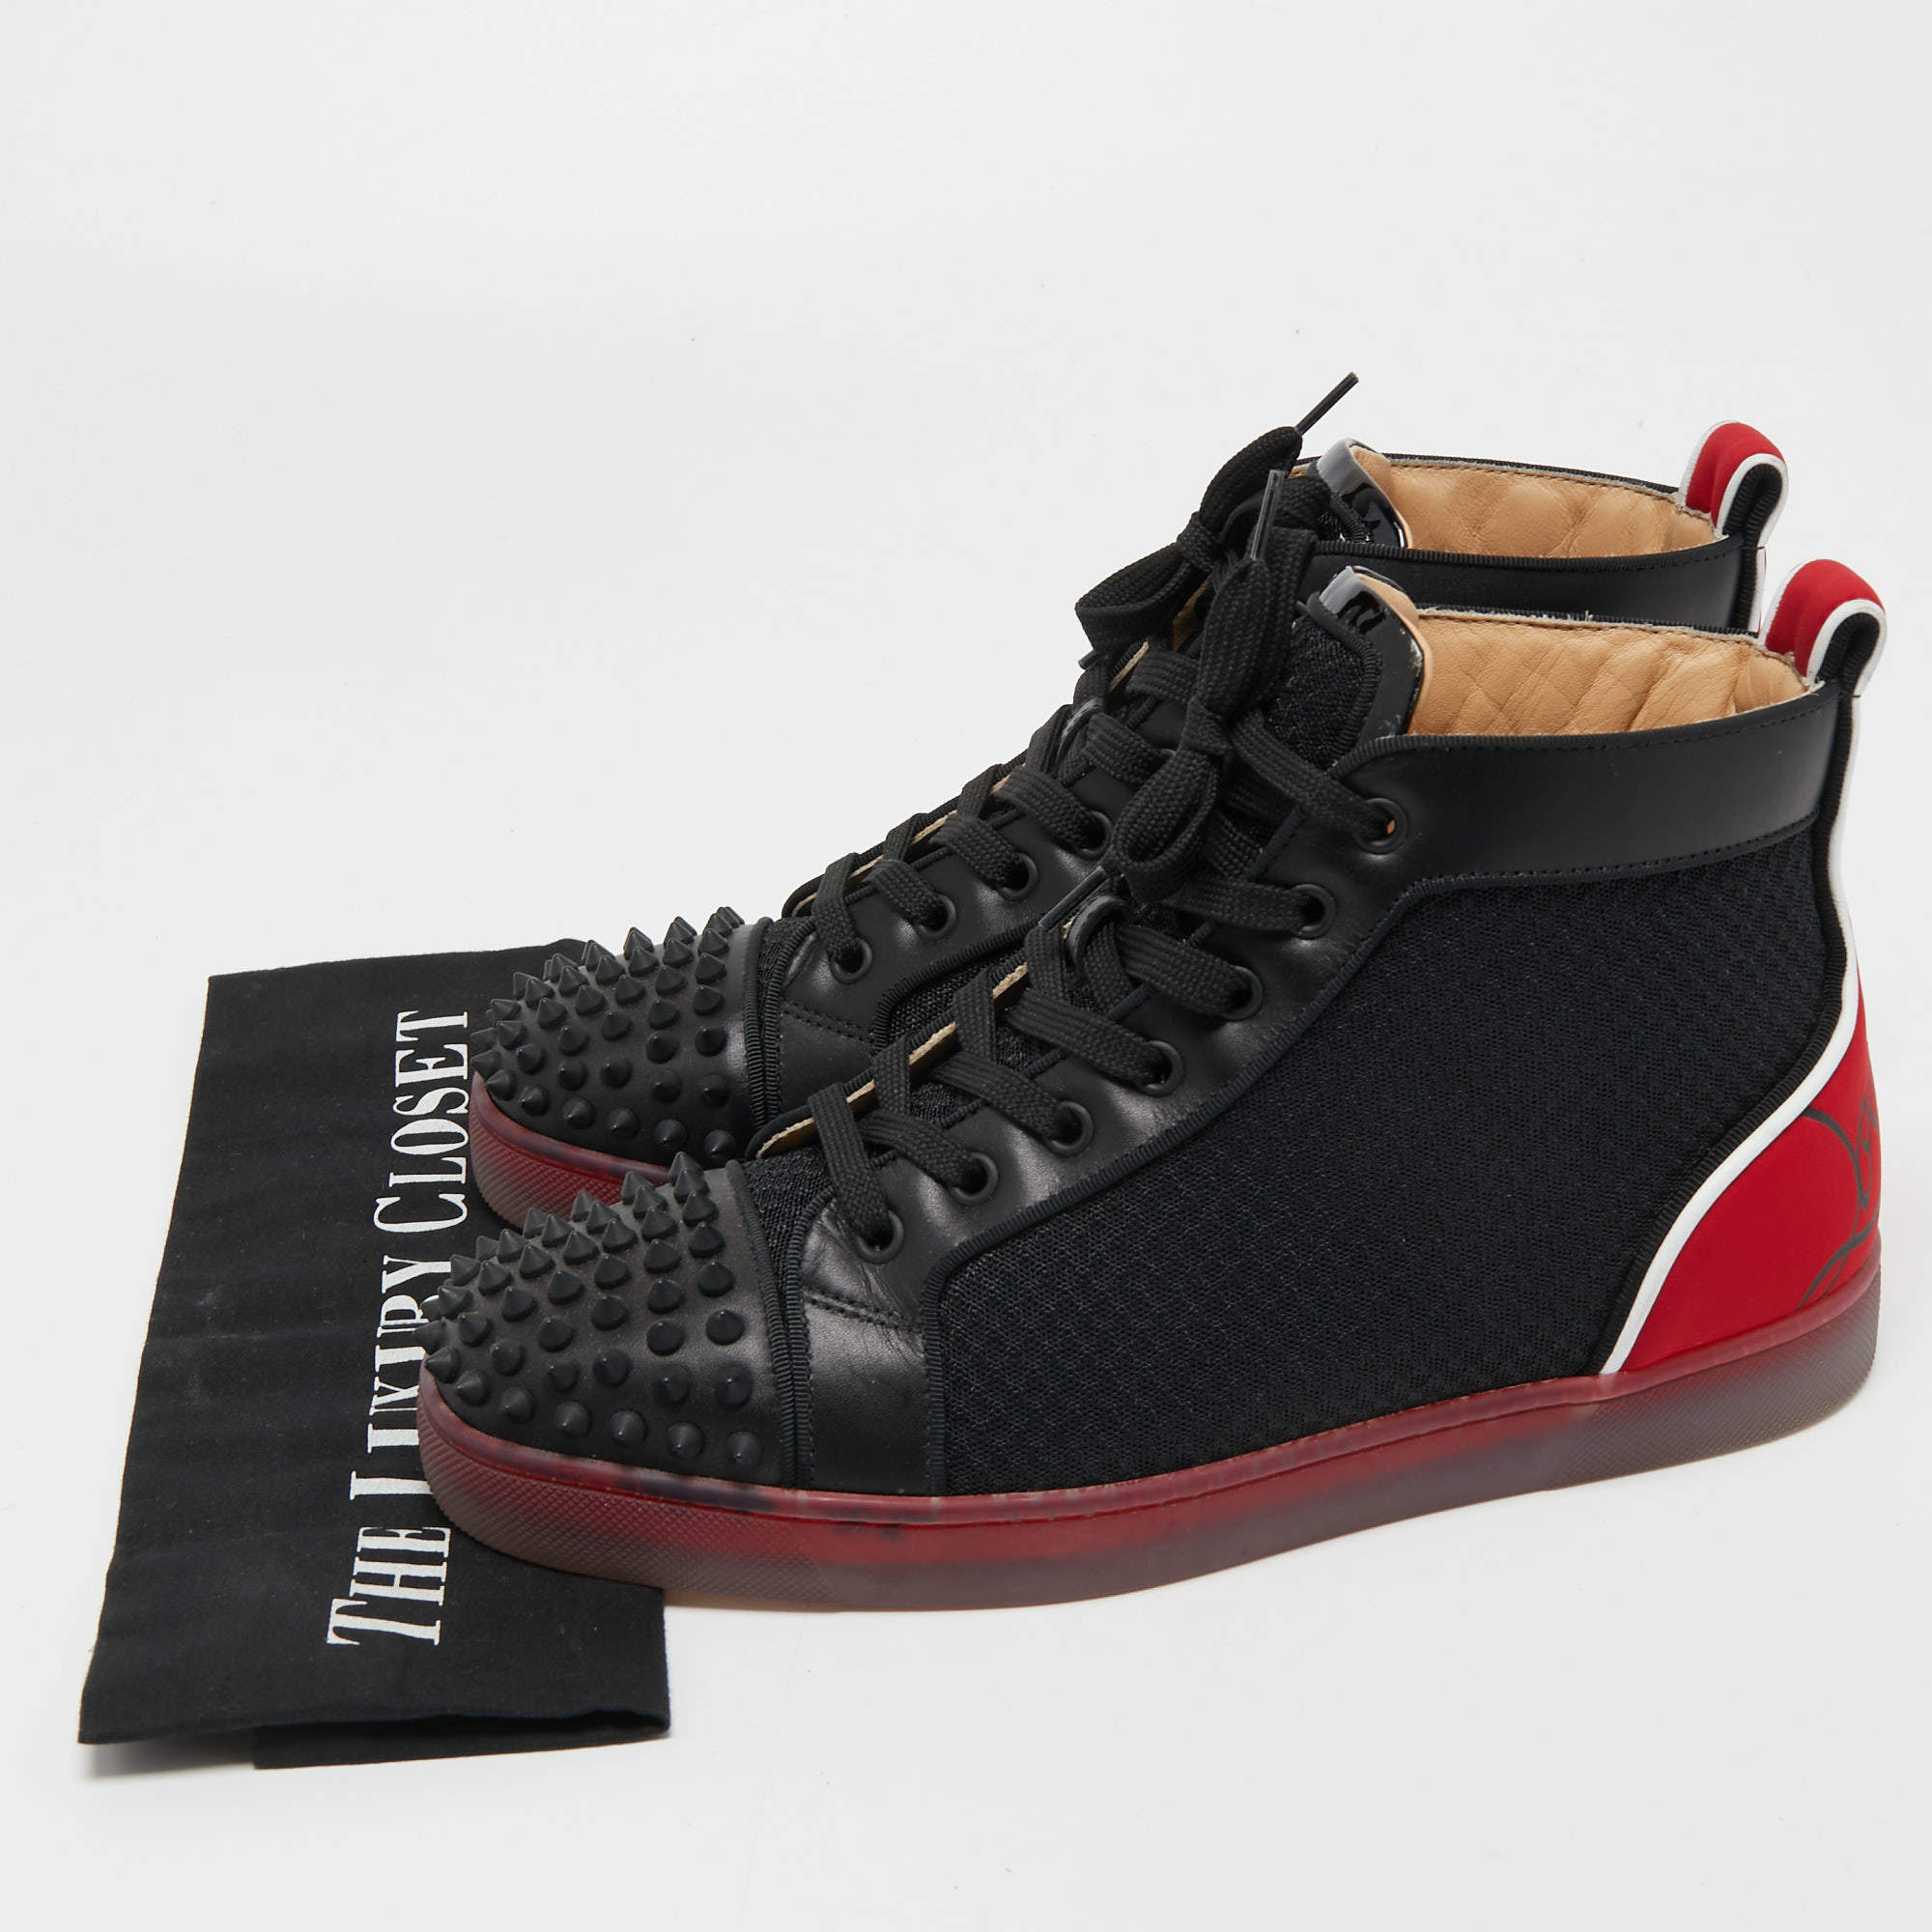 Christian Louboutin Louis Orlato Spikes Black Red Leather Sneakers